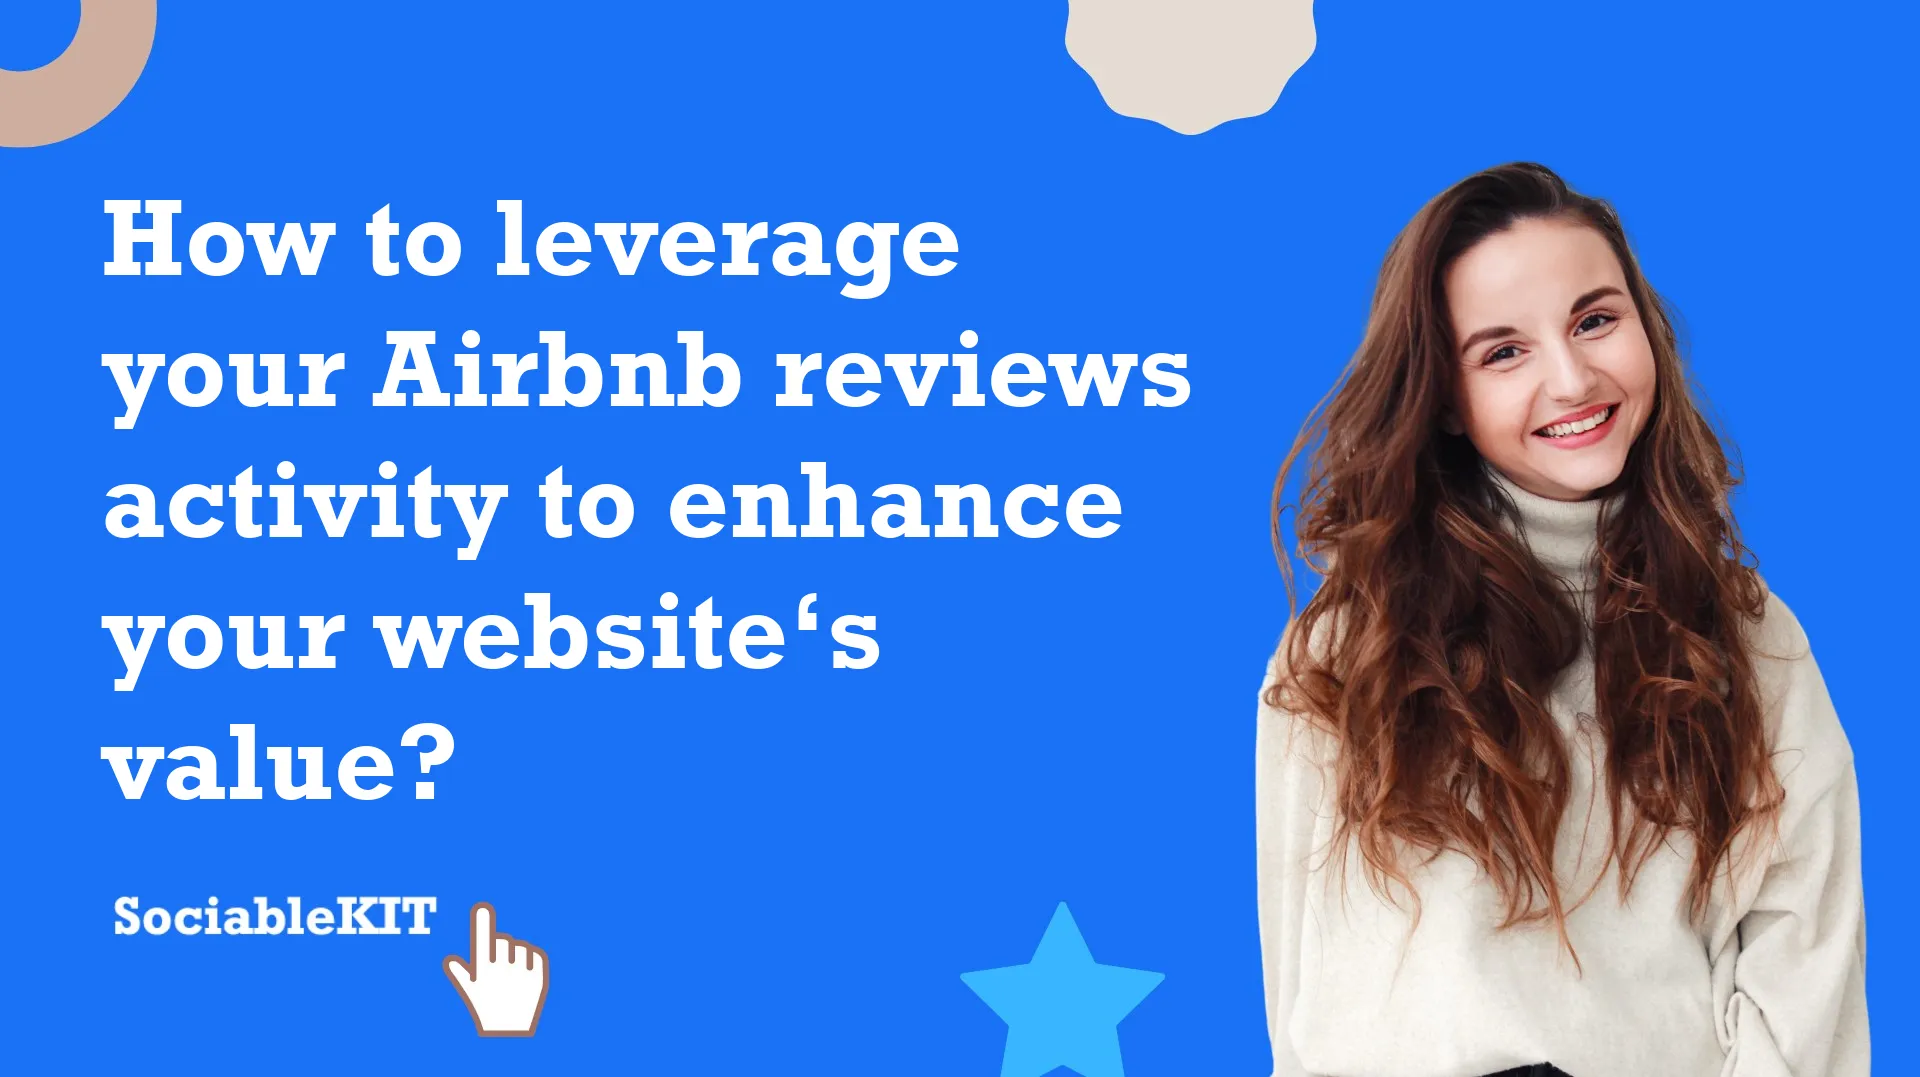 How to leverage your Airbnb reviews activity to enhance your website’s value?